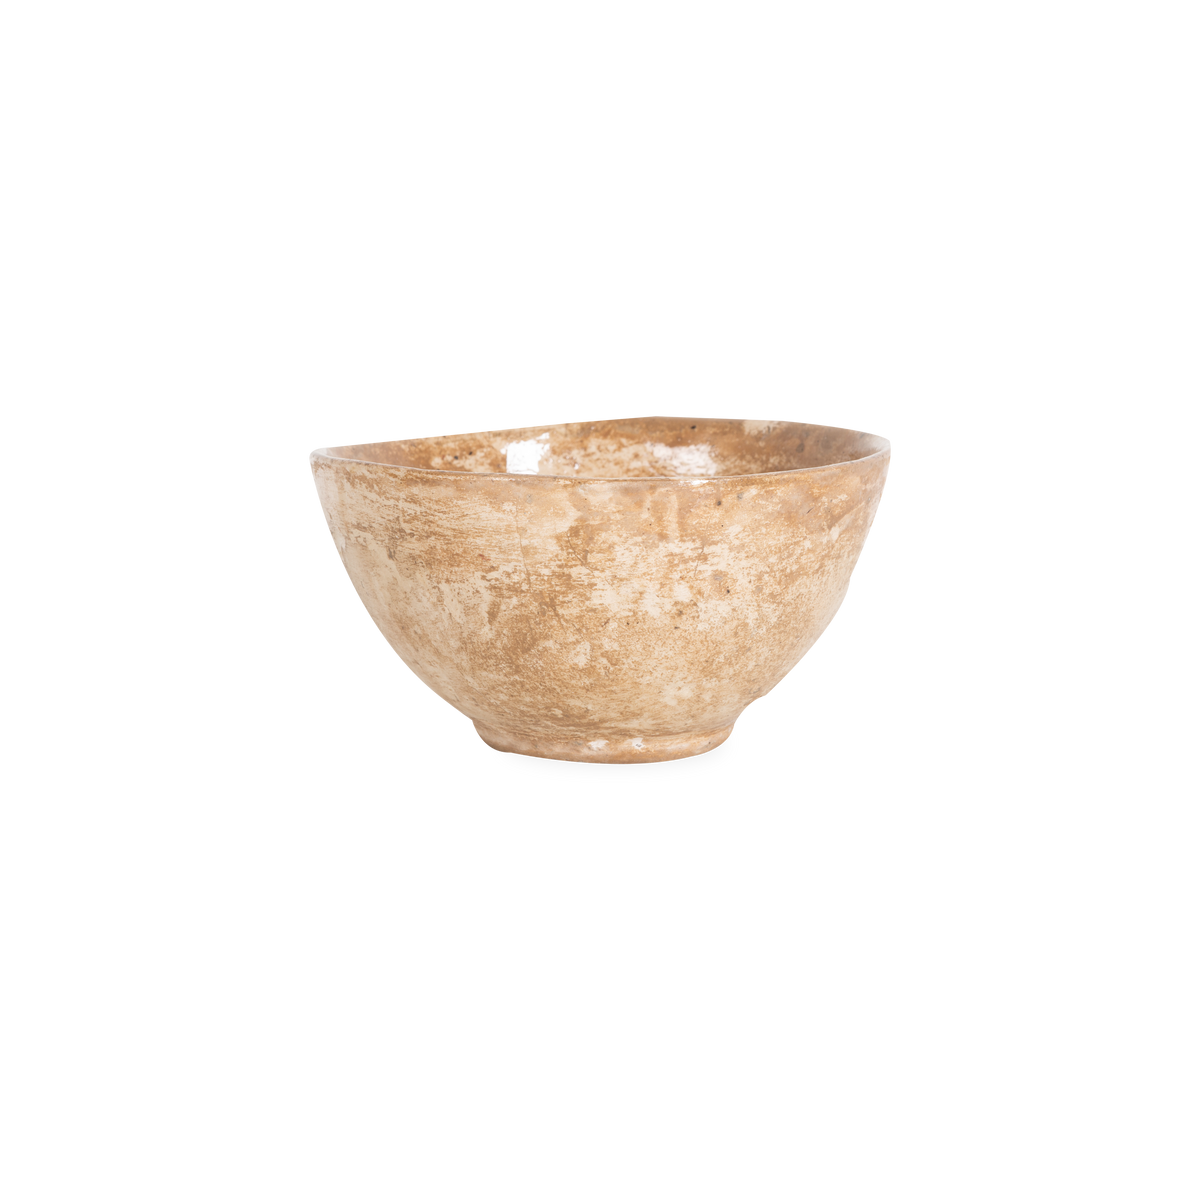 Adding an organic quality to your countertop collection, the Paper Mache Deep Bowl is defined by its rustic, visual textures and its unique exterior glaze.